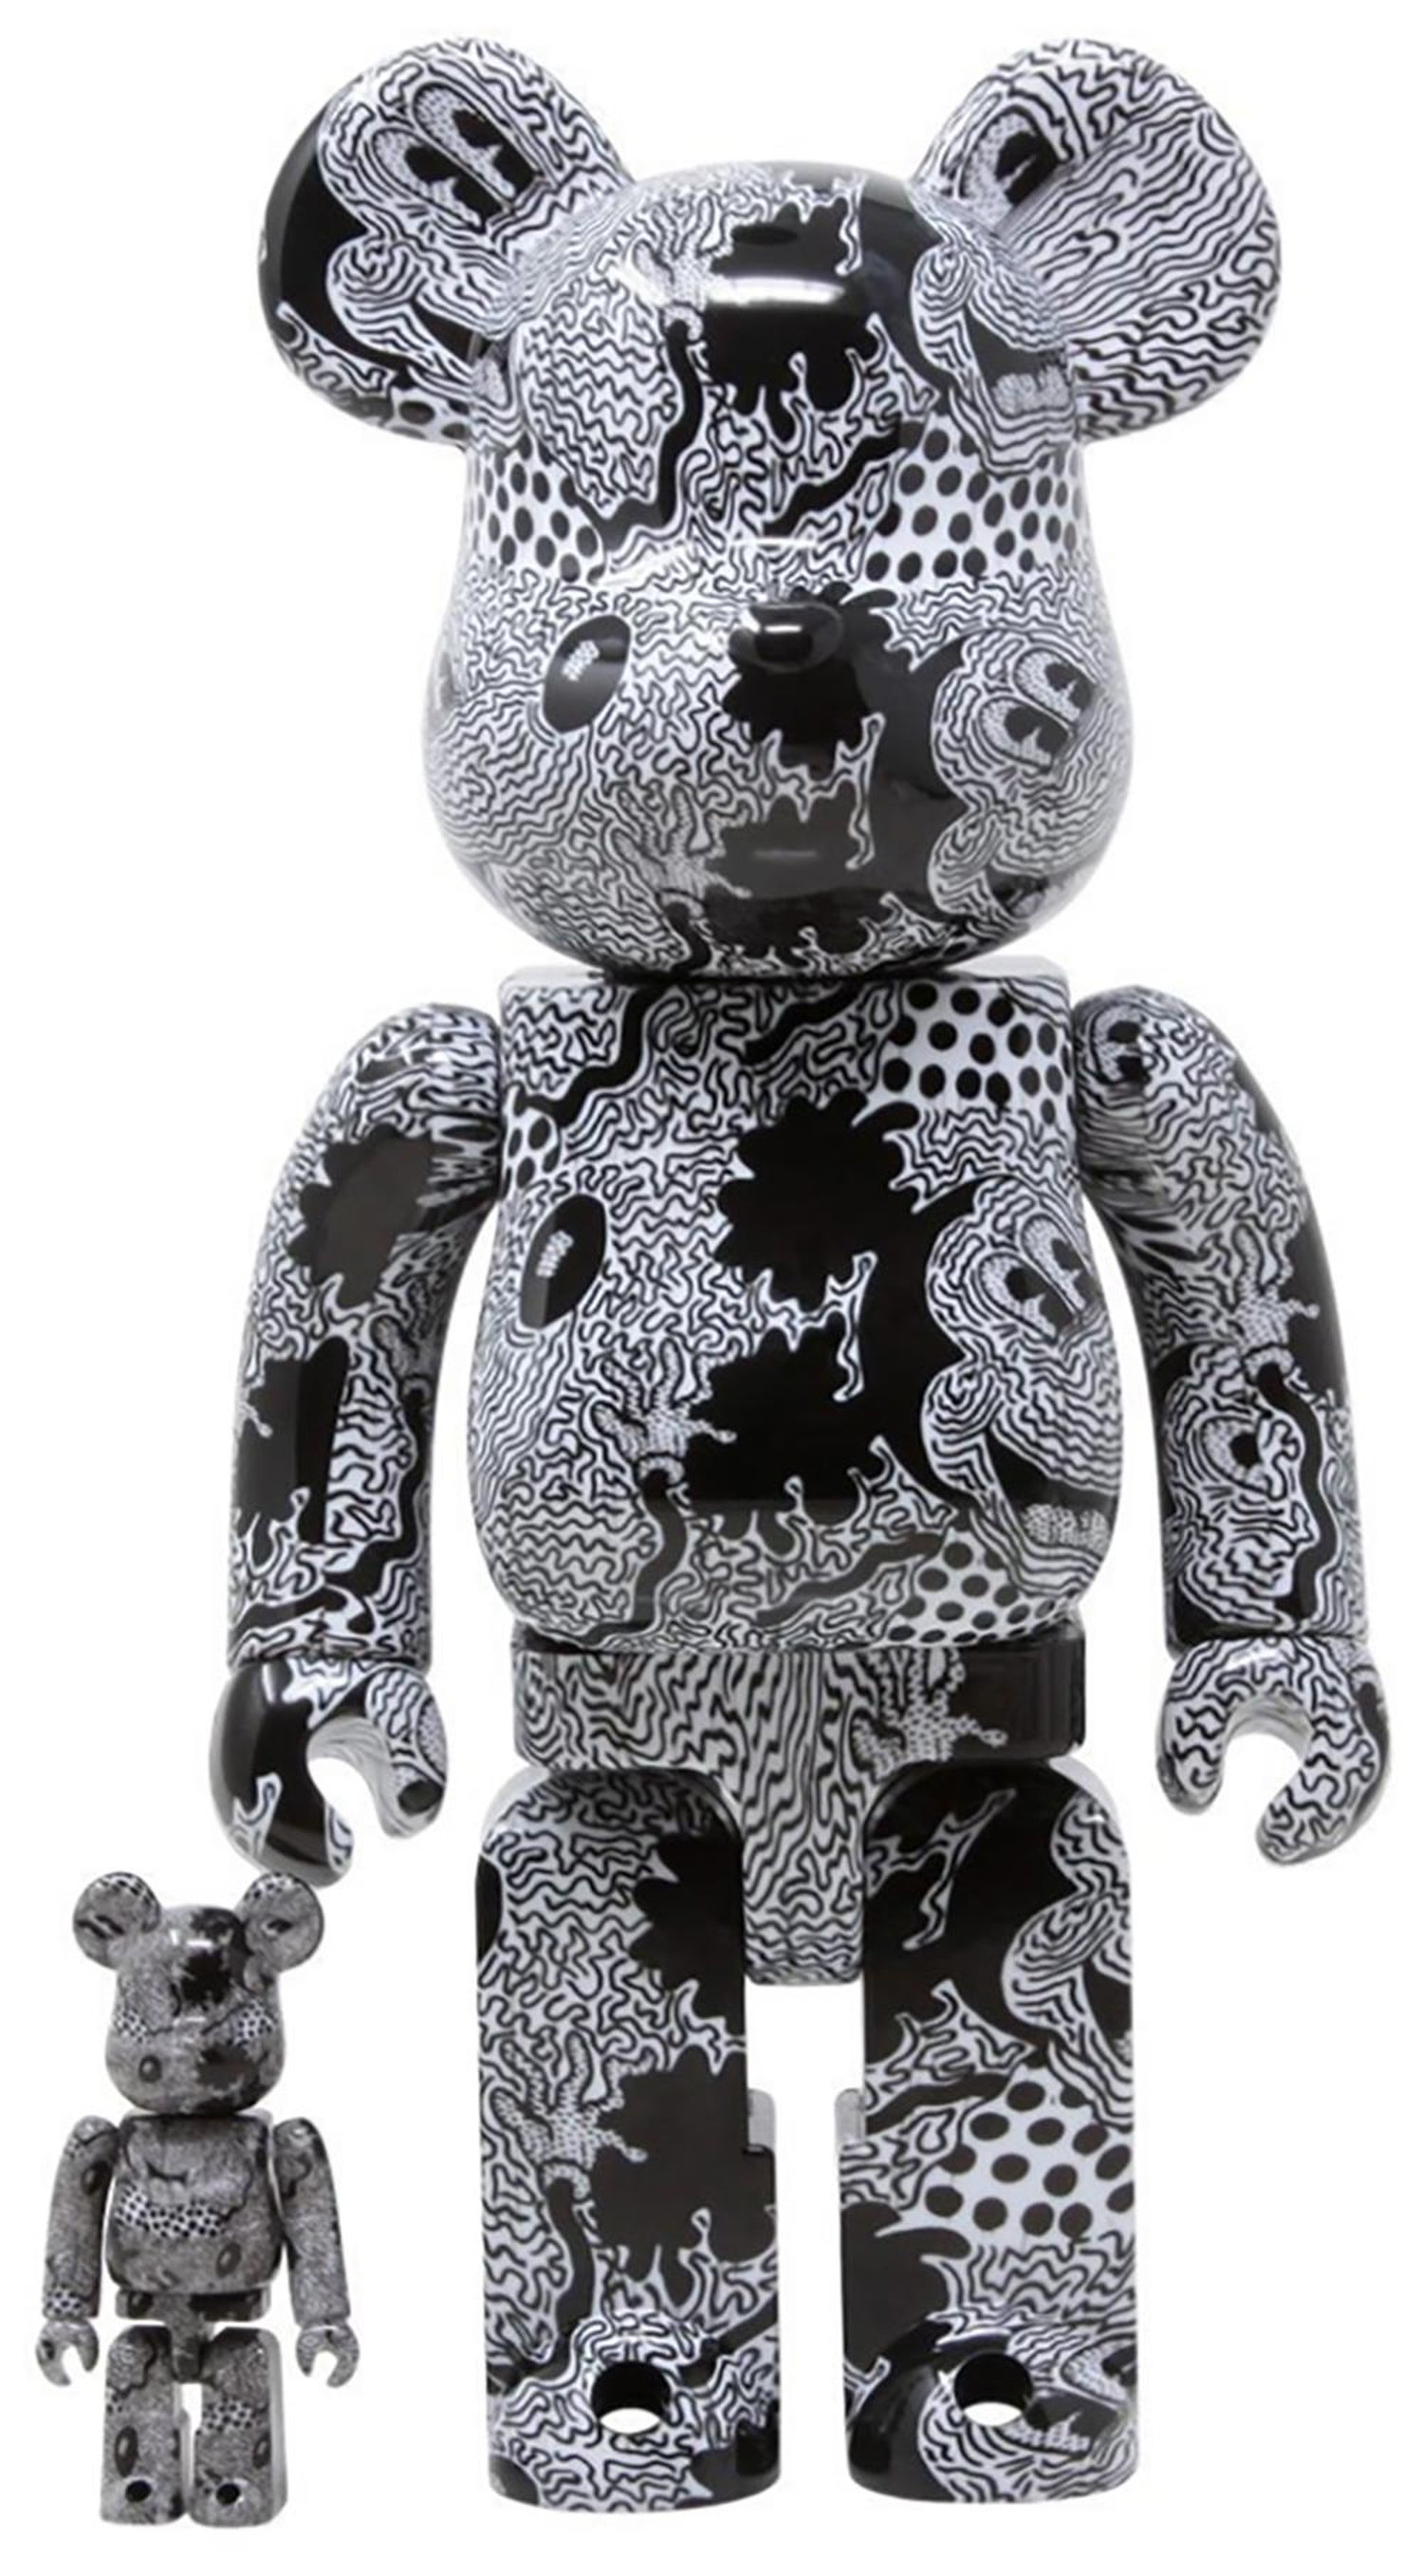 https://a.1stdibscdn.com/after-keith-haring-sculptures-keith-haring-bearbrick-400-companion-haring-mickey-mouse-berbrick-for-sale/a_3543/a_103699421654981344386/Haring_Disney_100_400_3_master.jpg?width=1500